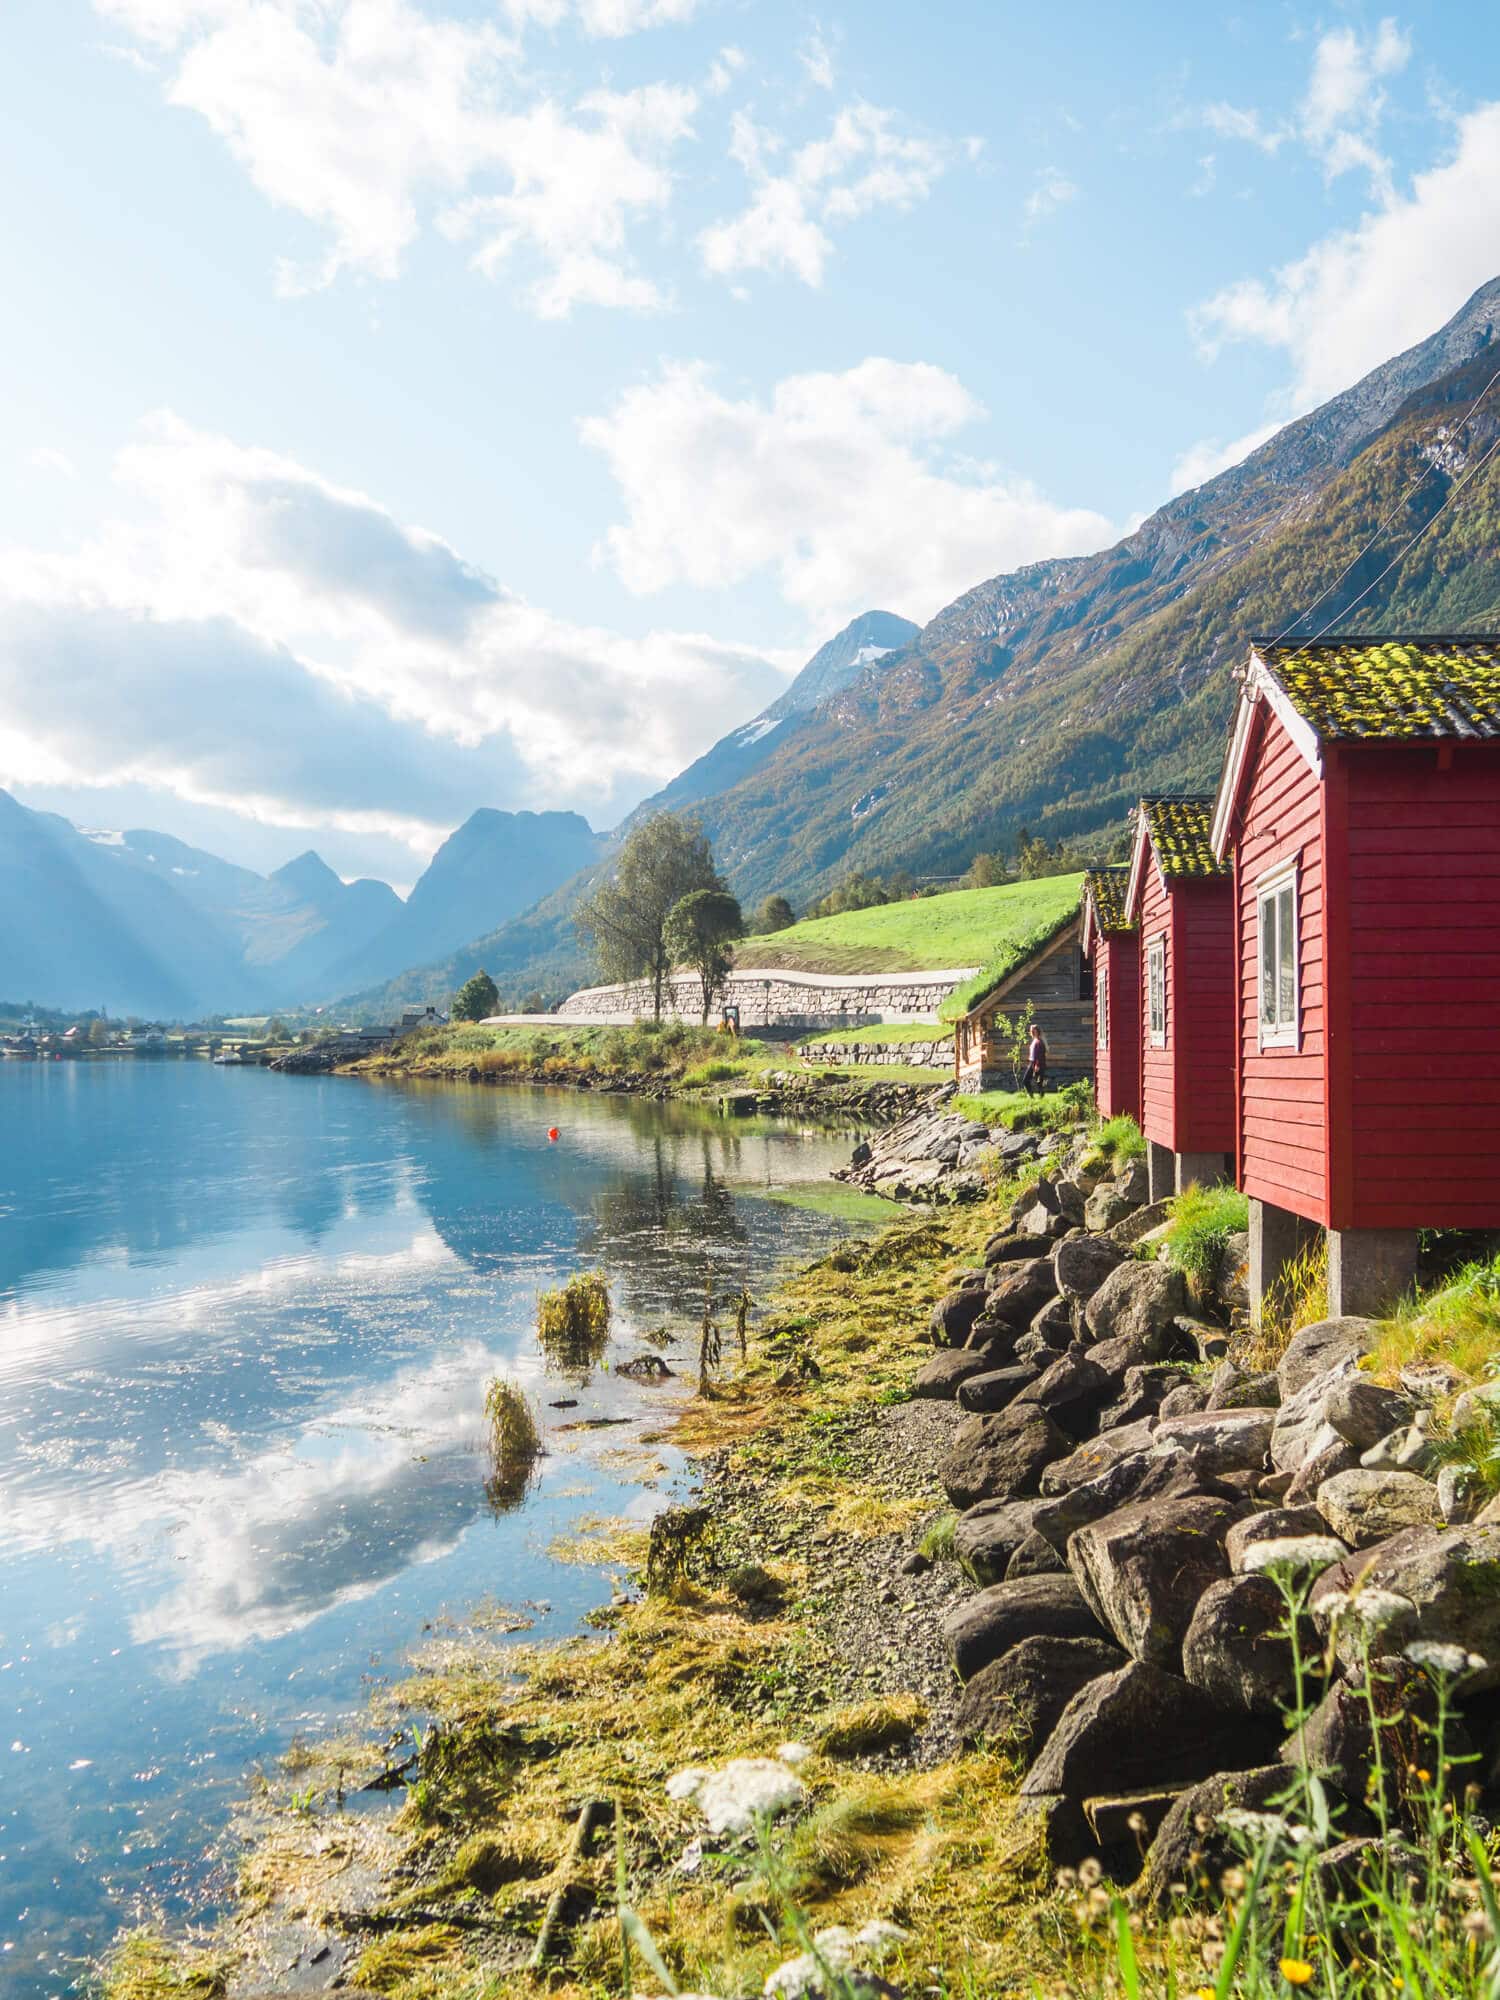 Top things to do in Norway - Olden camping close to the gorgeous Loen lake #bucketlist #norway #travelinspo